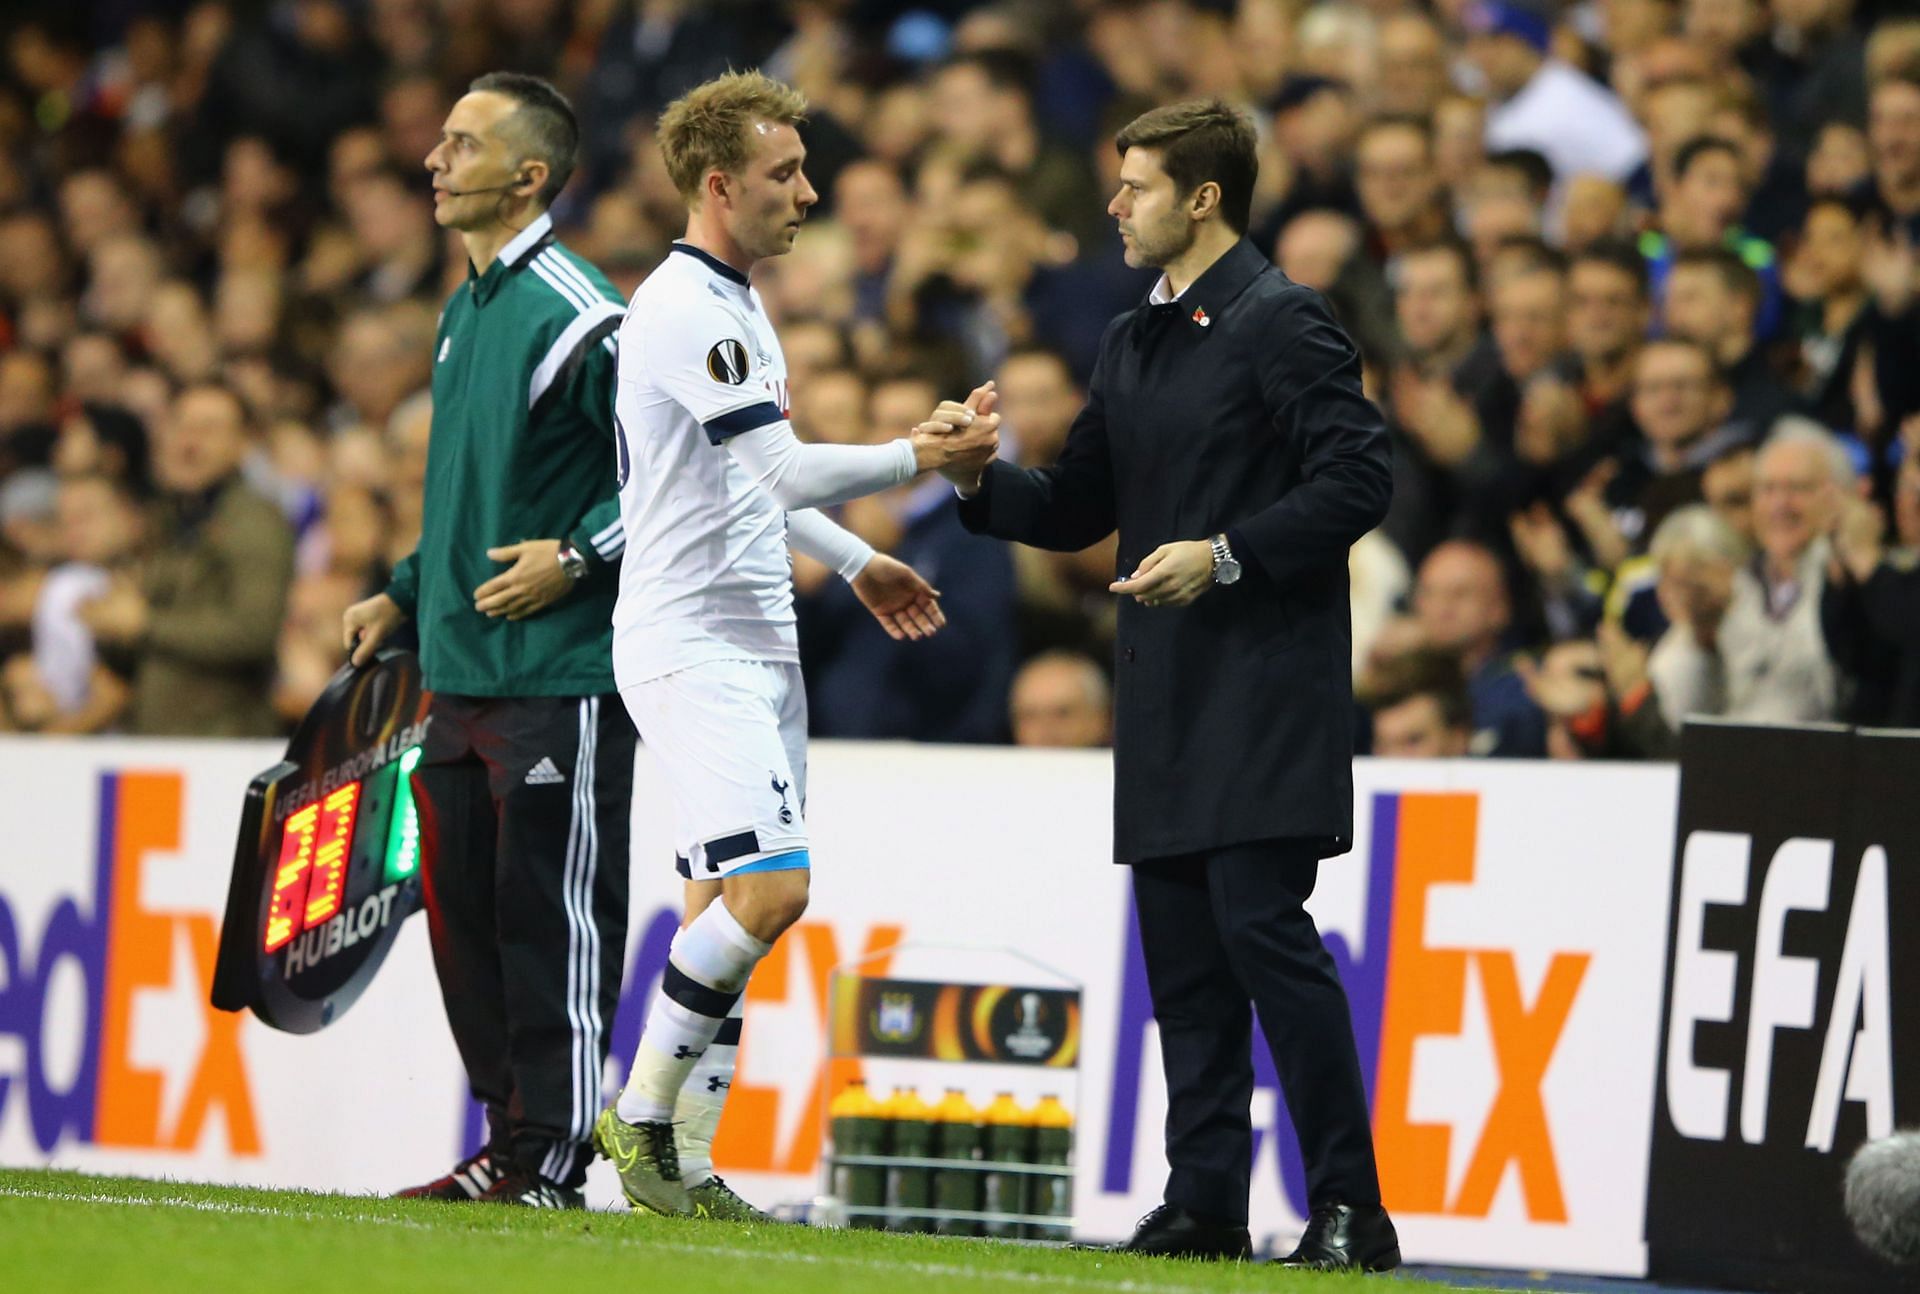 Christian Eriksen (left) greets Mauricio Pochettino after being subbed off.